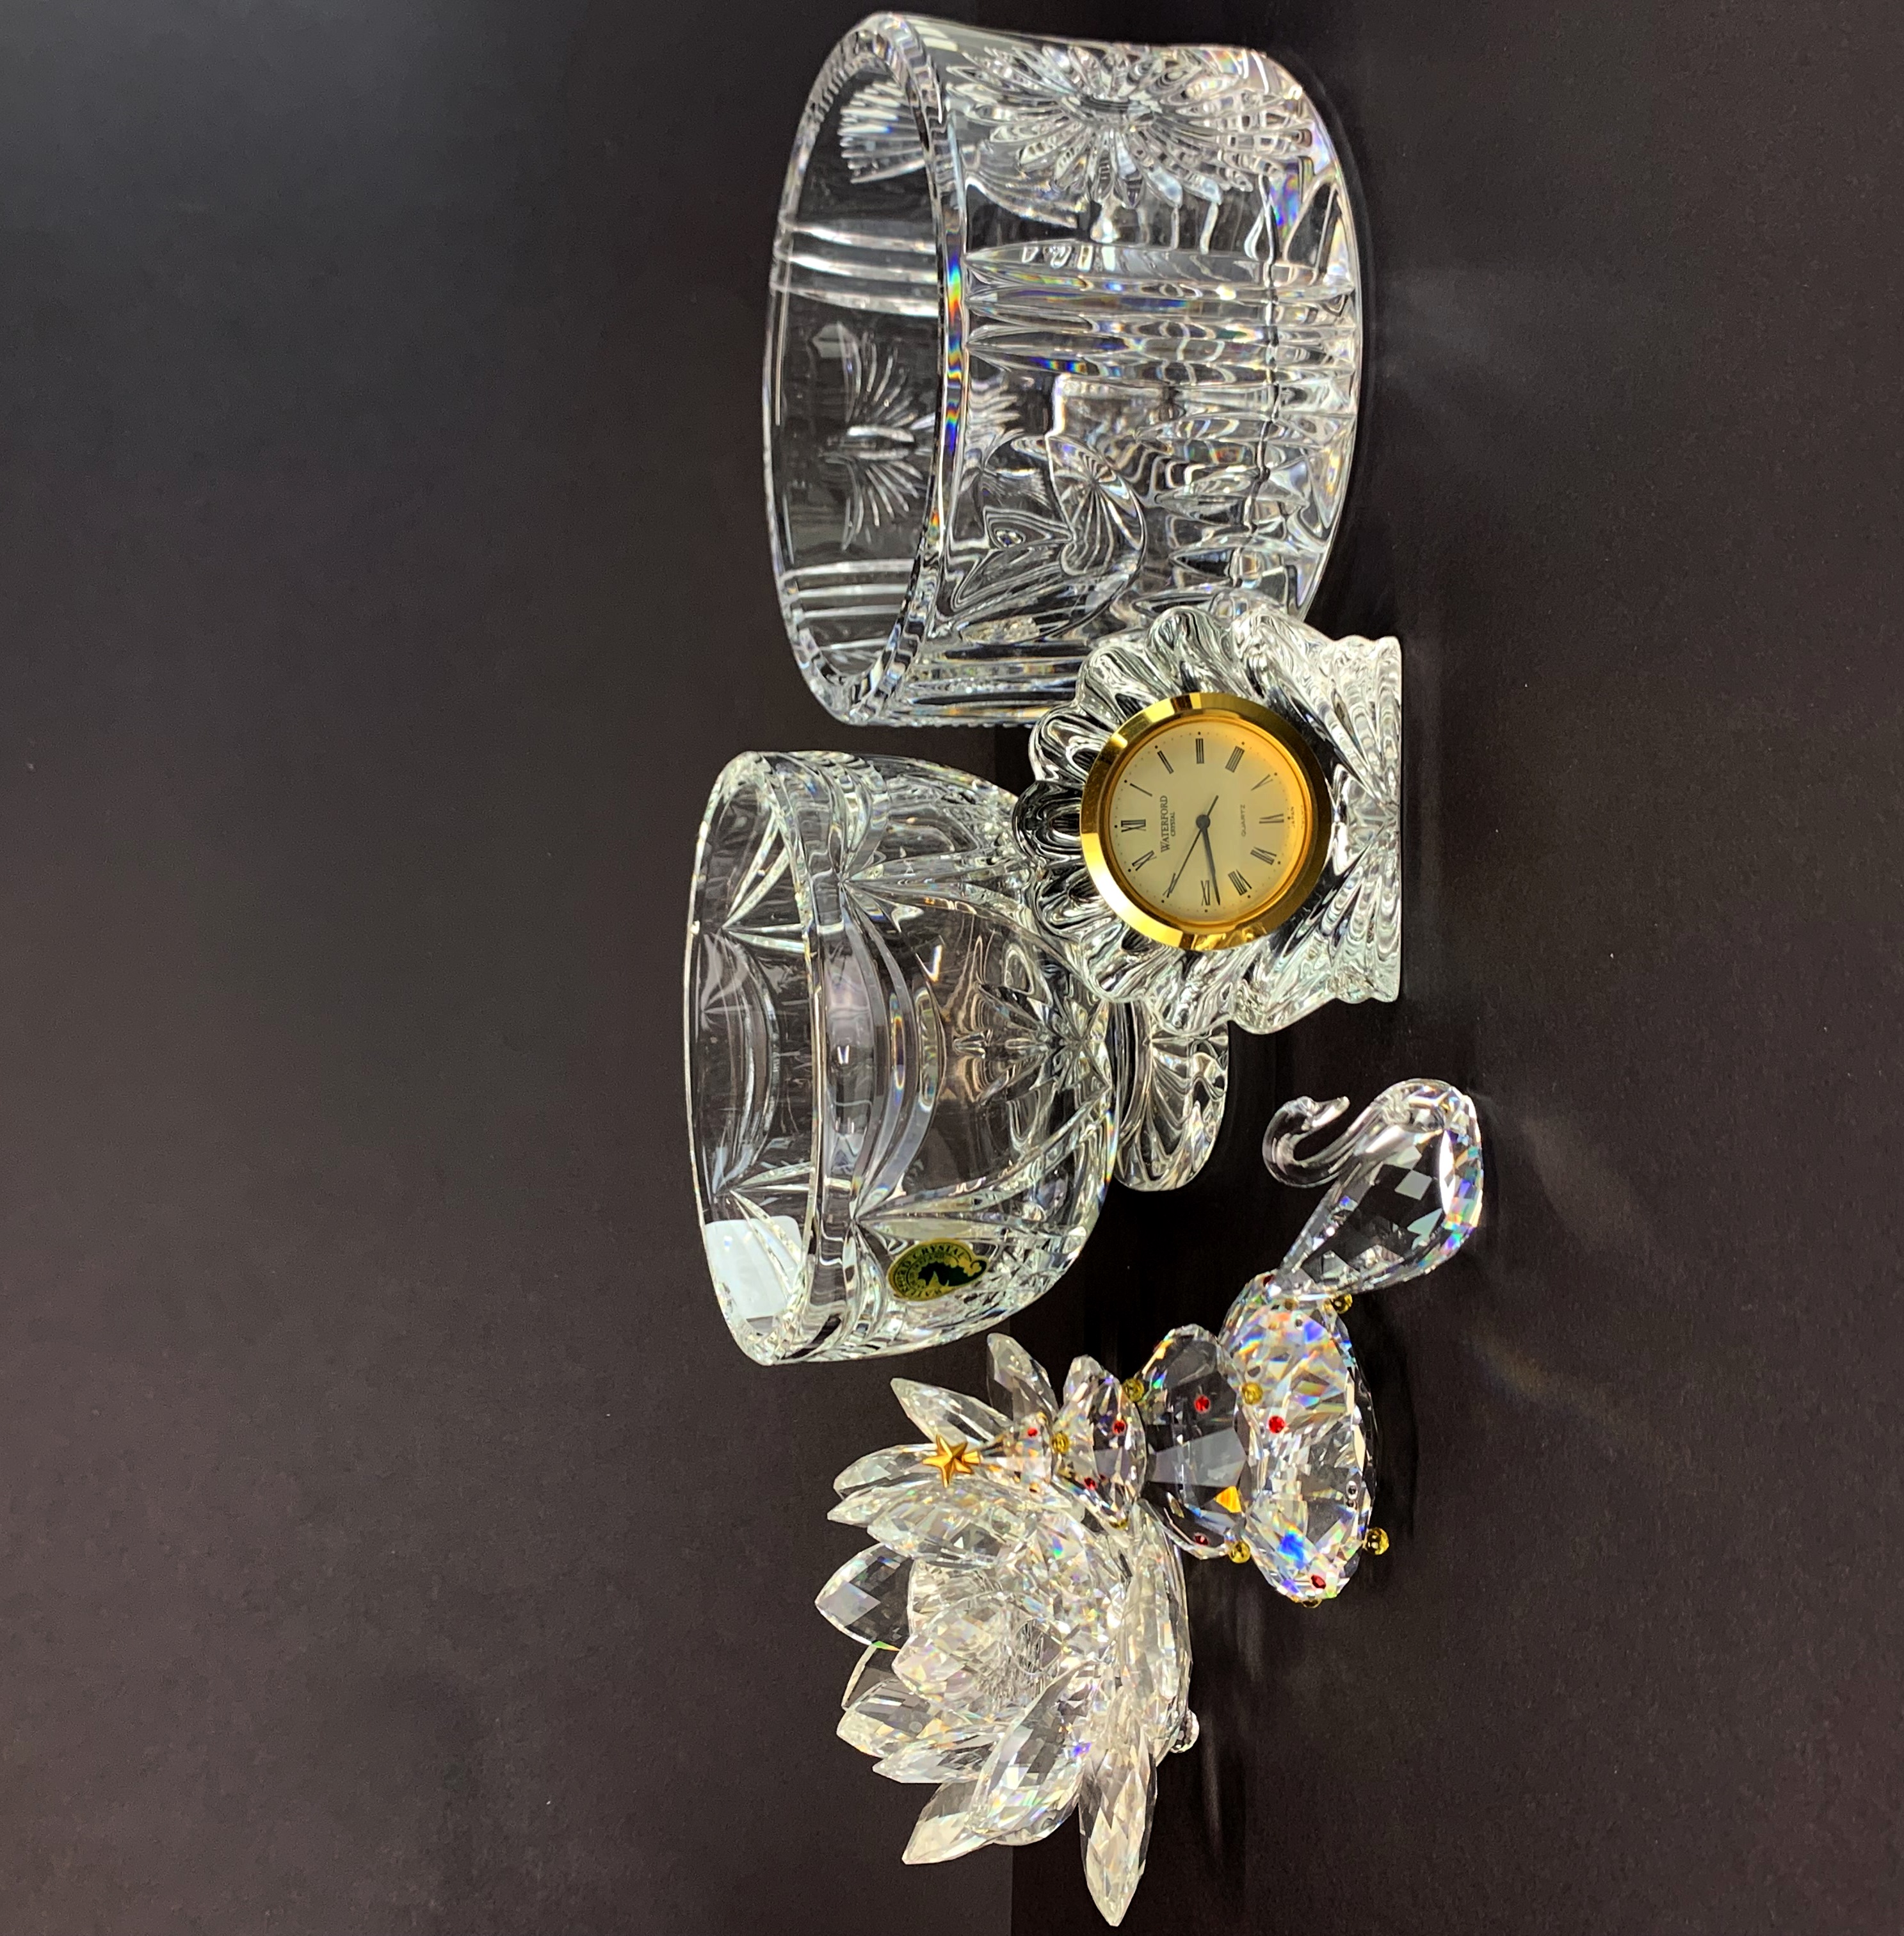 A quantity of Waterford and Swarovski glass items, with some boxes, tallest 9.5cm.